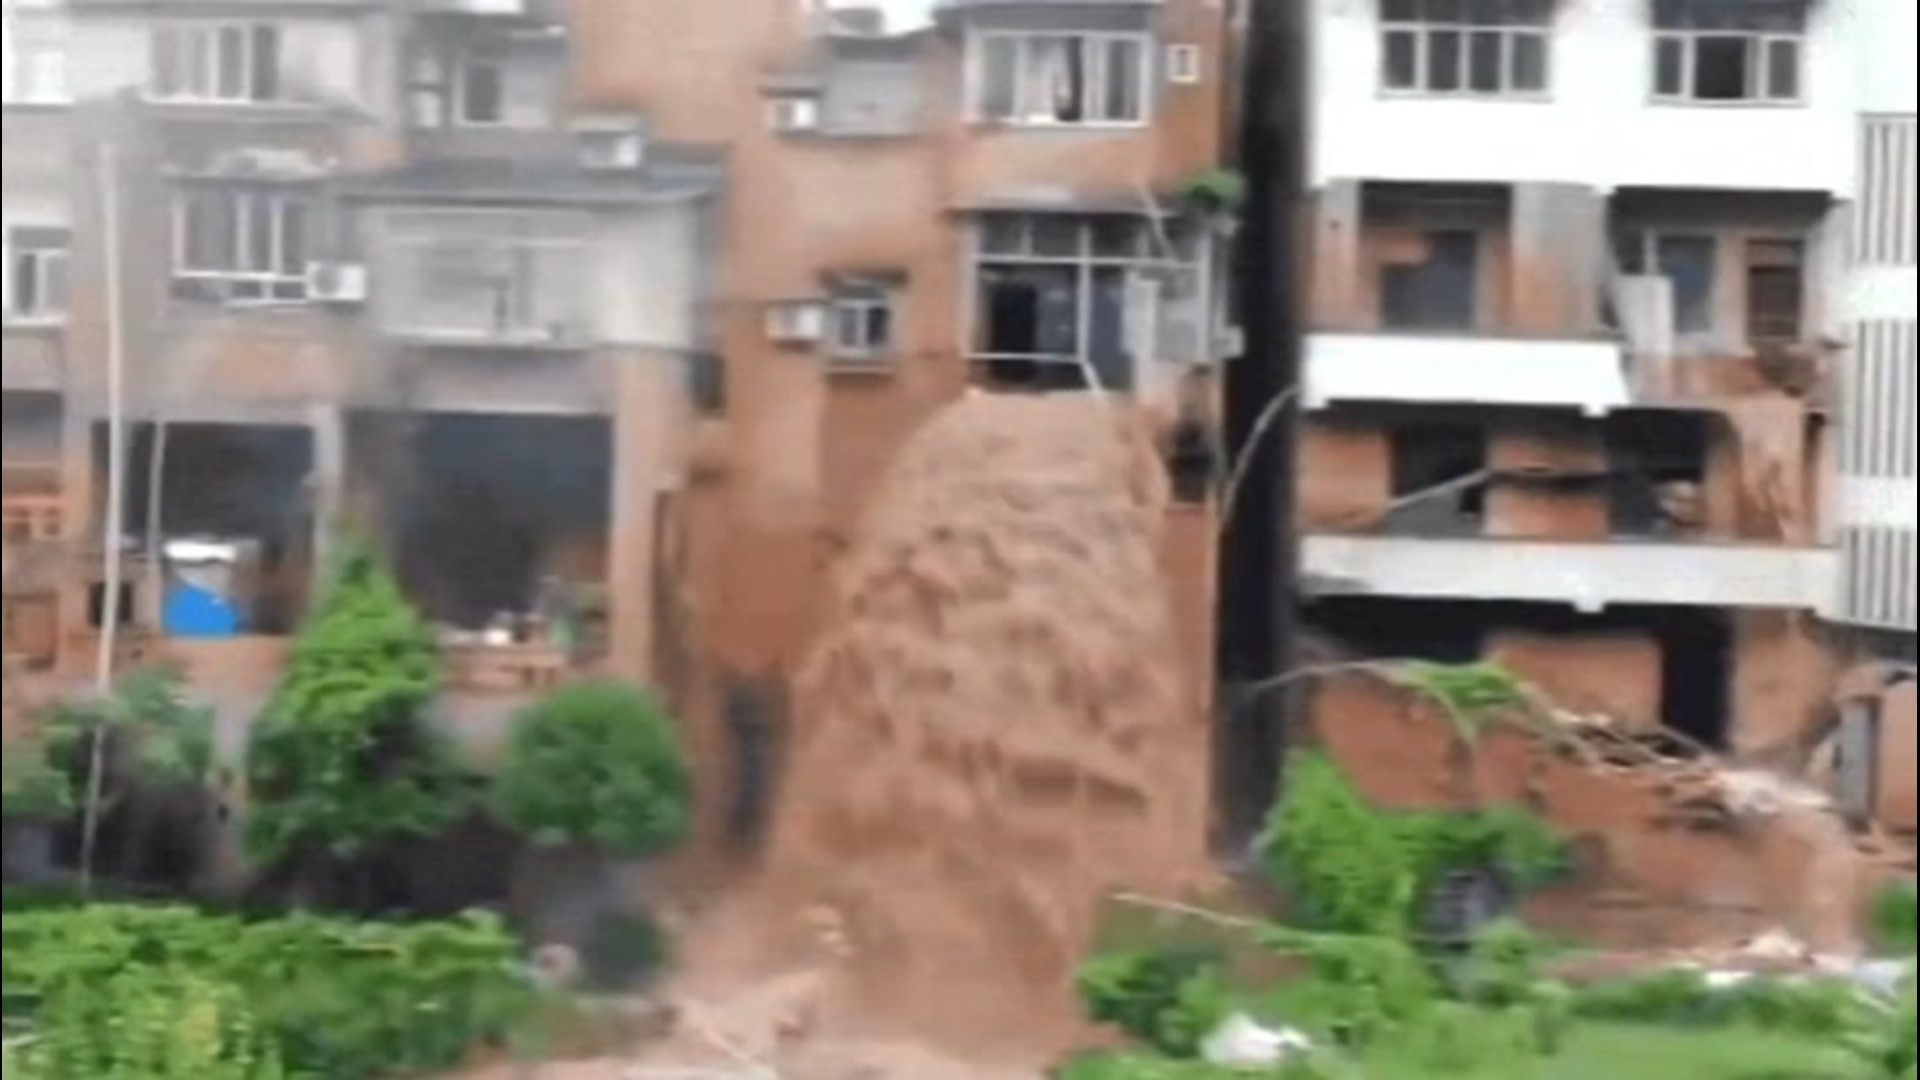 A rainstorm inundated the city of Chongqing, China, on July 1, with severe flooding. Floodwaters poured out of this building like a waterfall.